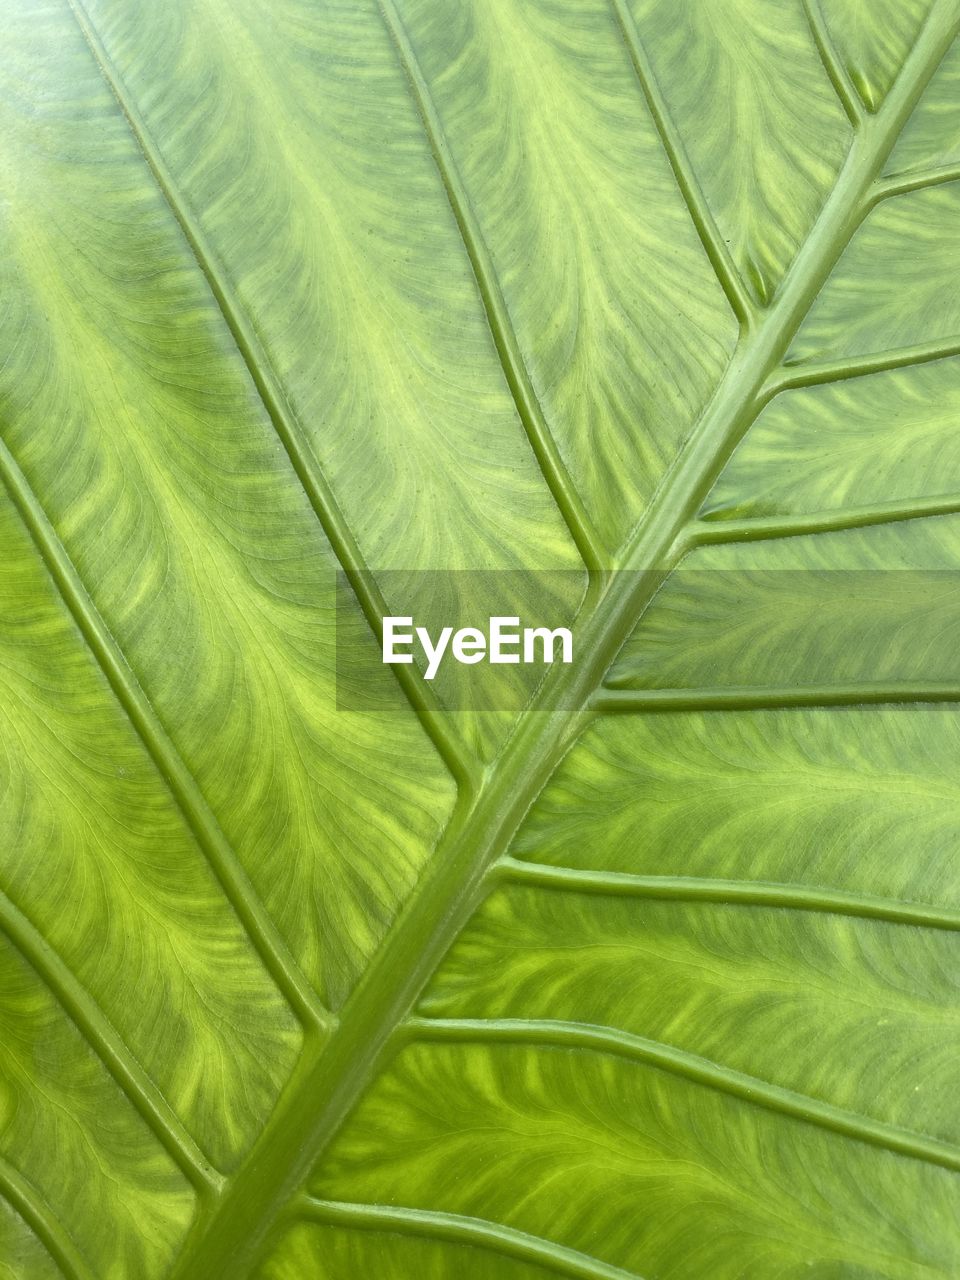 leaf, plant part, green, backgrounds, plant, full frame, close-up, palm leaf, leaf vein, no people, growth, pattern, nature, palm tree, beauty in nature, textured, frond, flower, tree, plant stem, tropical climate, botany, fern, fragility, outdoors, day, ferns and horsetails, macro